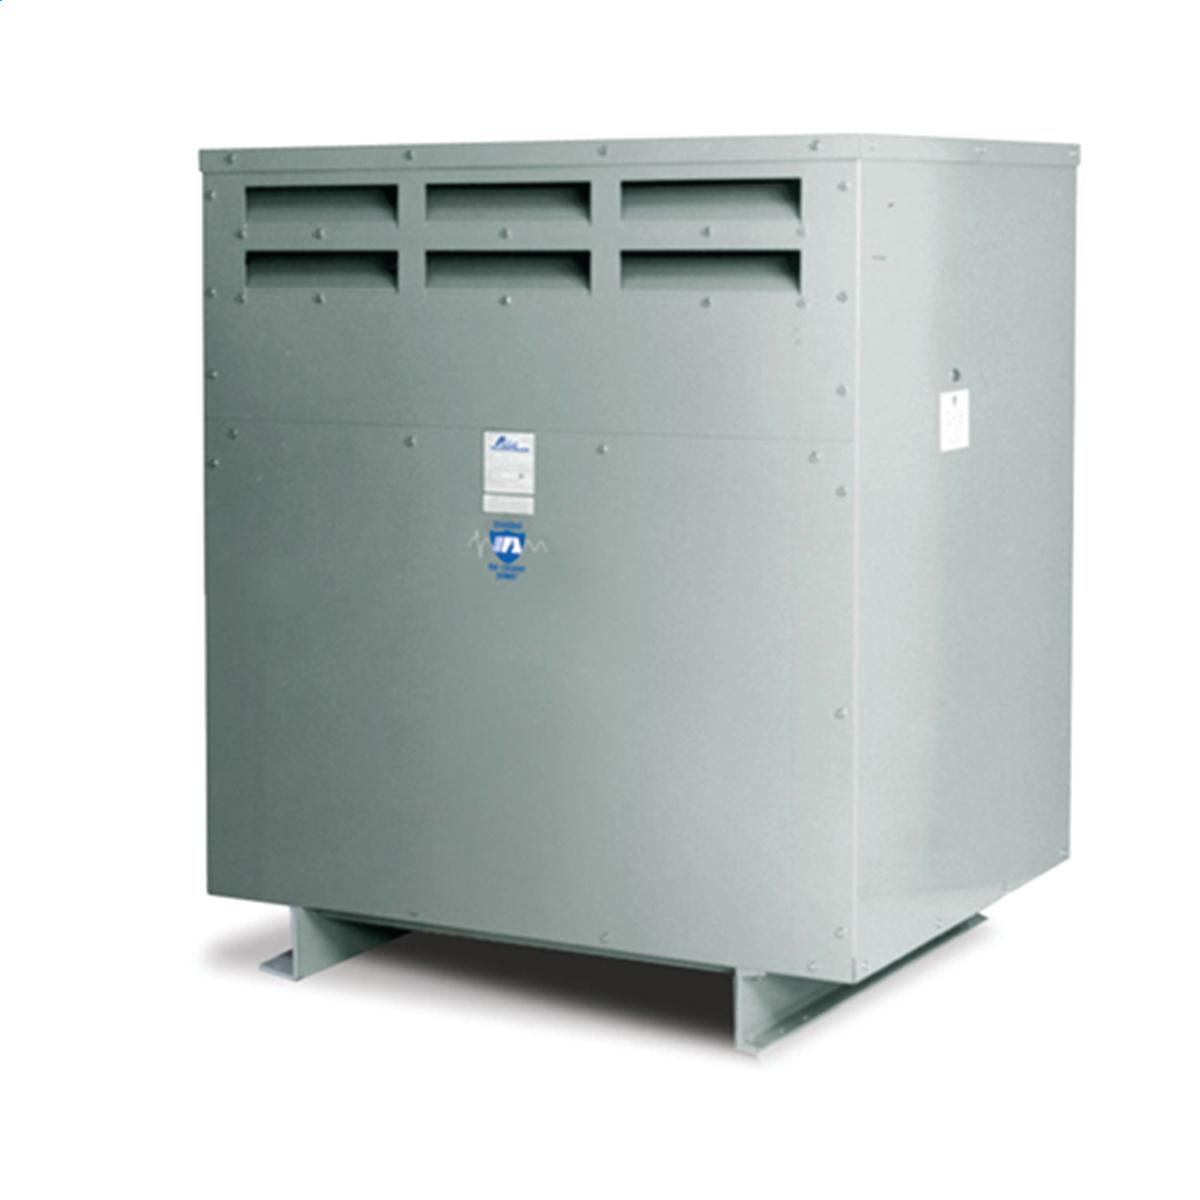 Hubbell WI015M16 Medium Voltage Transformer - Three Phase, 4160Δ - 208Y//120V, 1500kVA  ; Lower operating cost over Liquid-filled ; No additional fireproofing or venting ; Long life expectancy ; Smaller, lighter easy to maintain